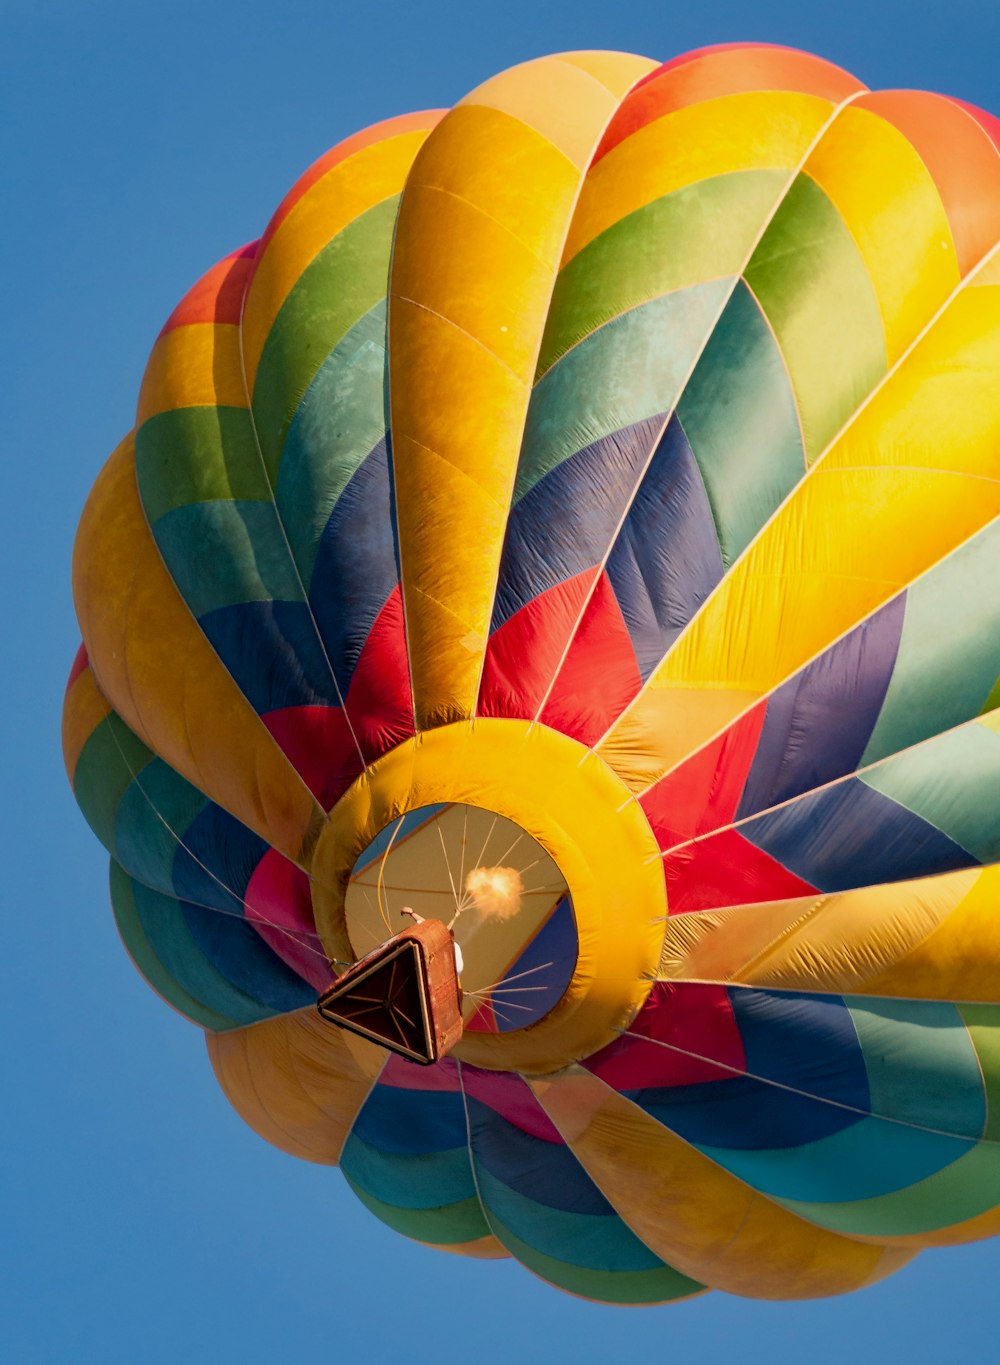 a colorful hot air balloon flying in a blue sky